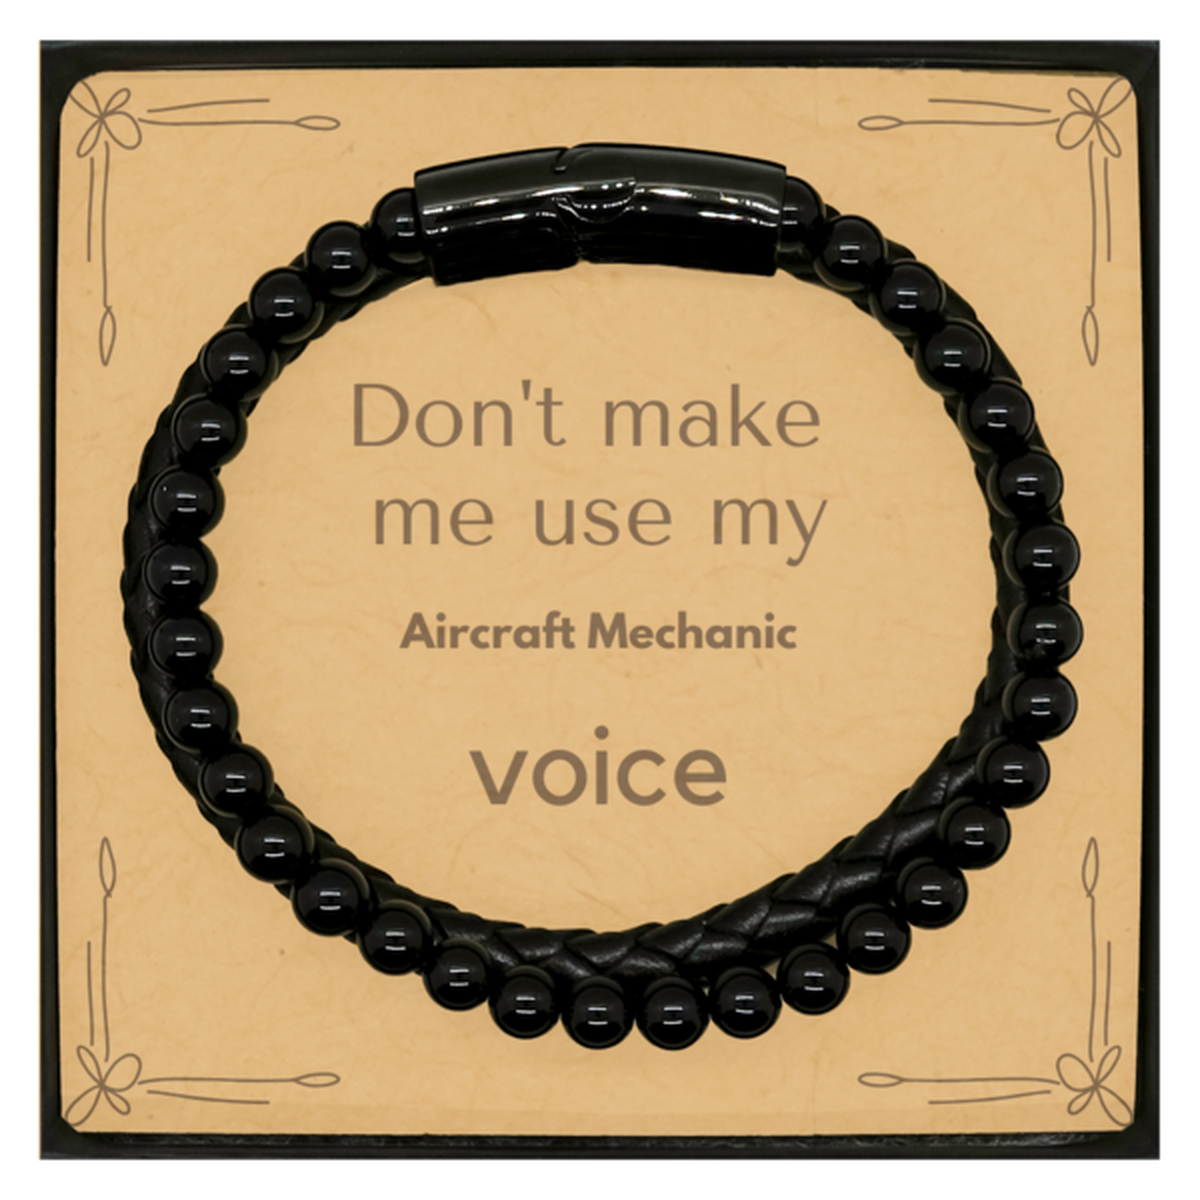 Don't make me use my Aircraft Mechanic voice, Sarcasm Aircraft Mechanic Card Gifts, Christmas Aircraft Mechanic Stone Leather Bracelets Birthday Unique Gifts For Aircraft Mechanic Coworkers, Men, Women, Colleague, Friends